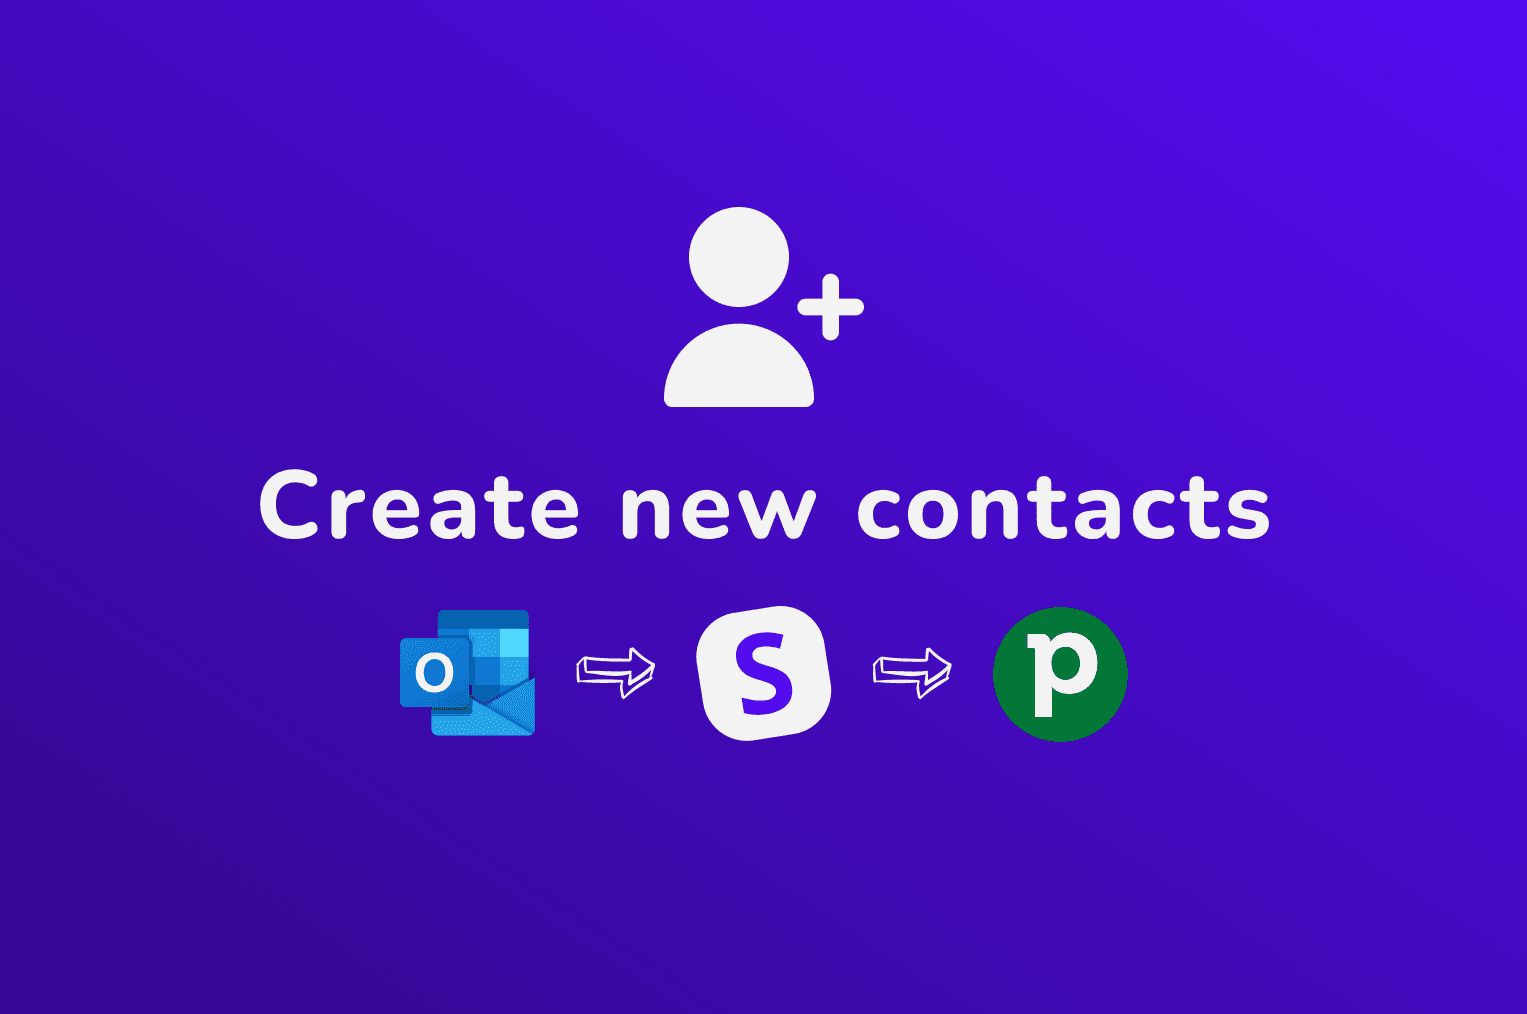 Create new contacts